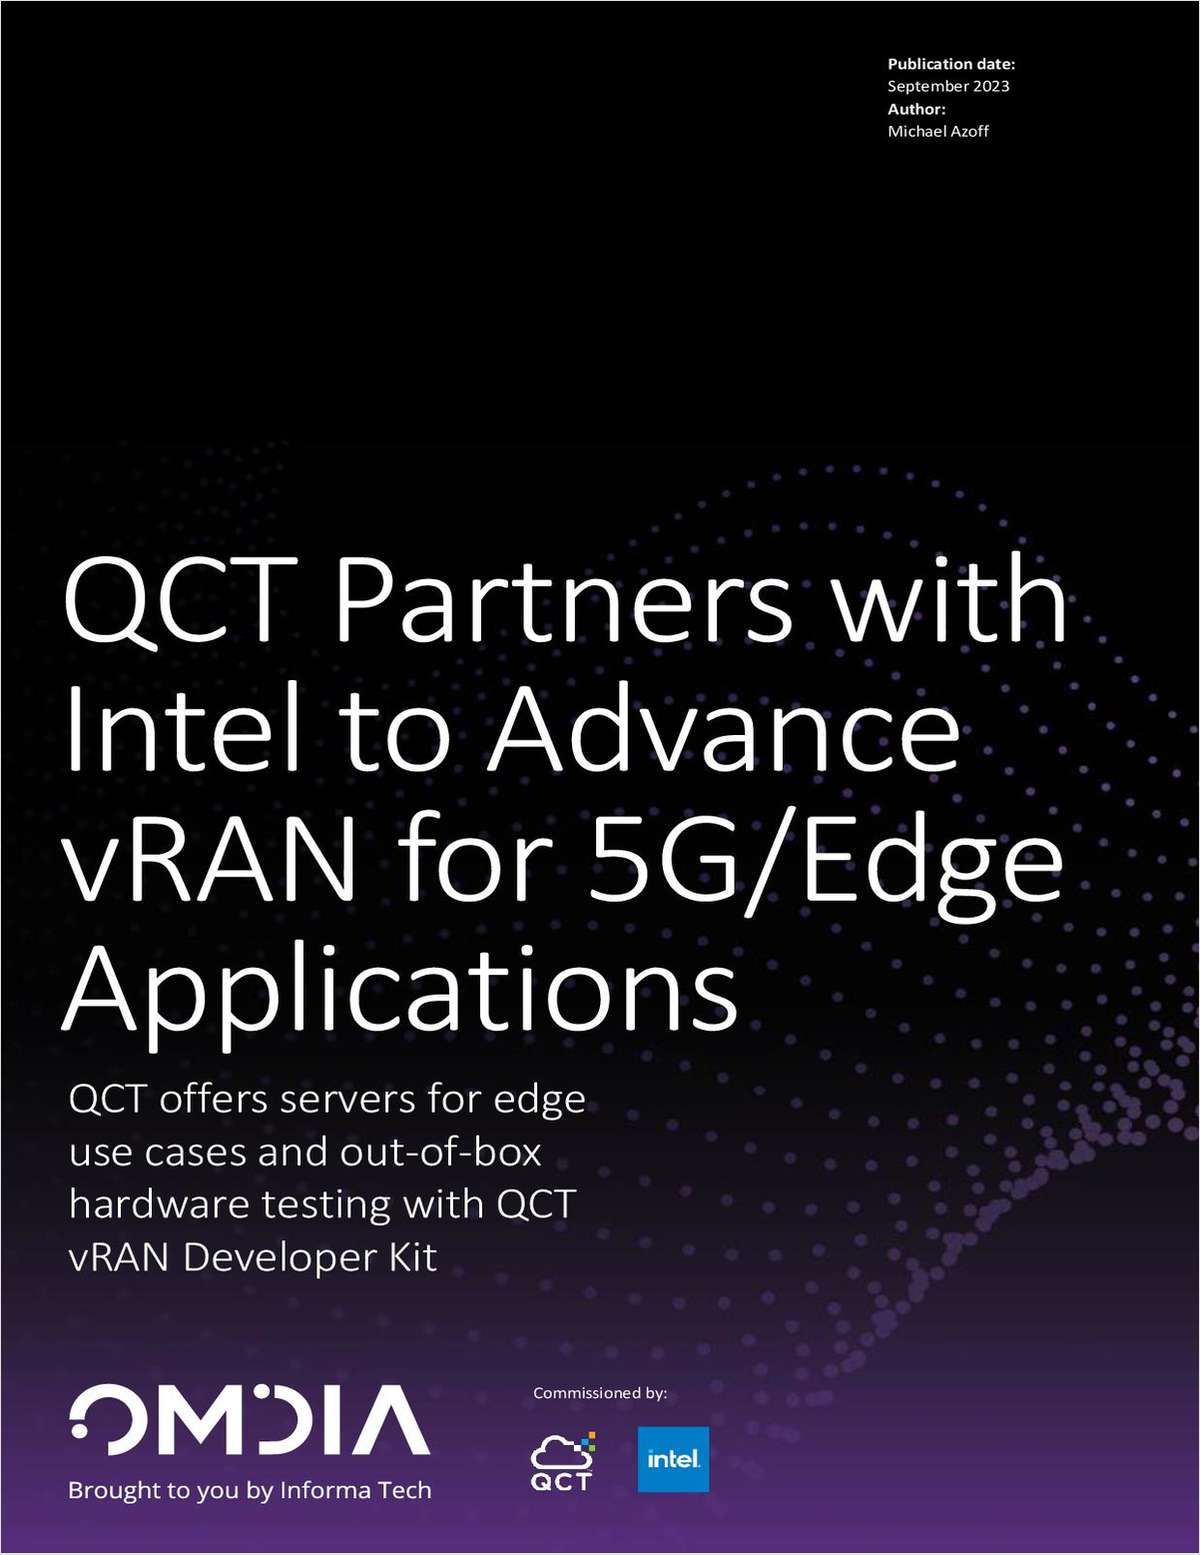 QCT Partners with Intel to Advance vRAN for 5G Edge Applications